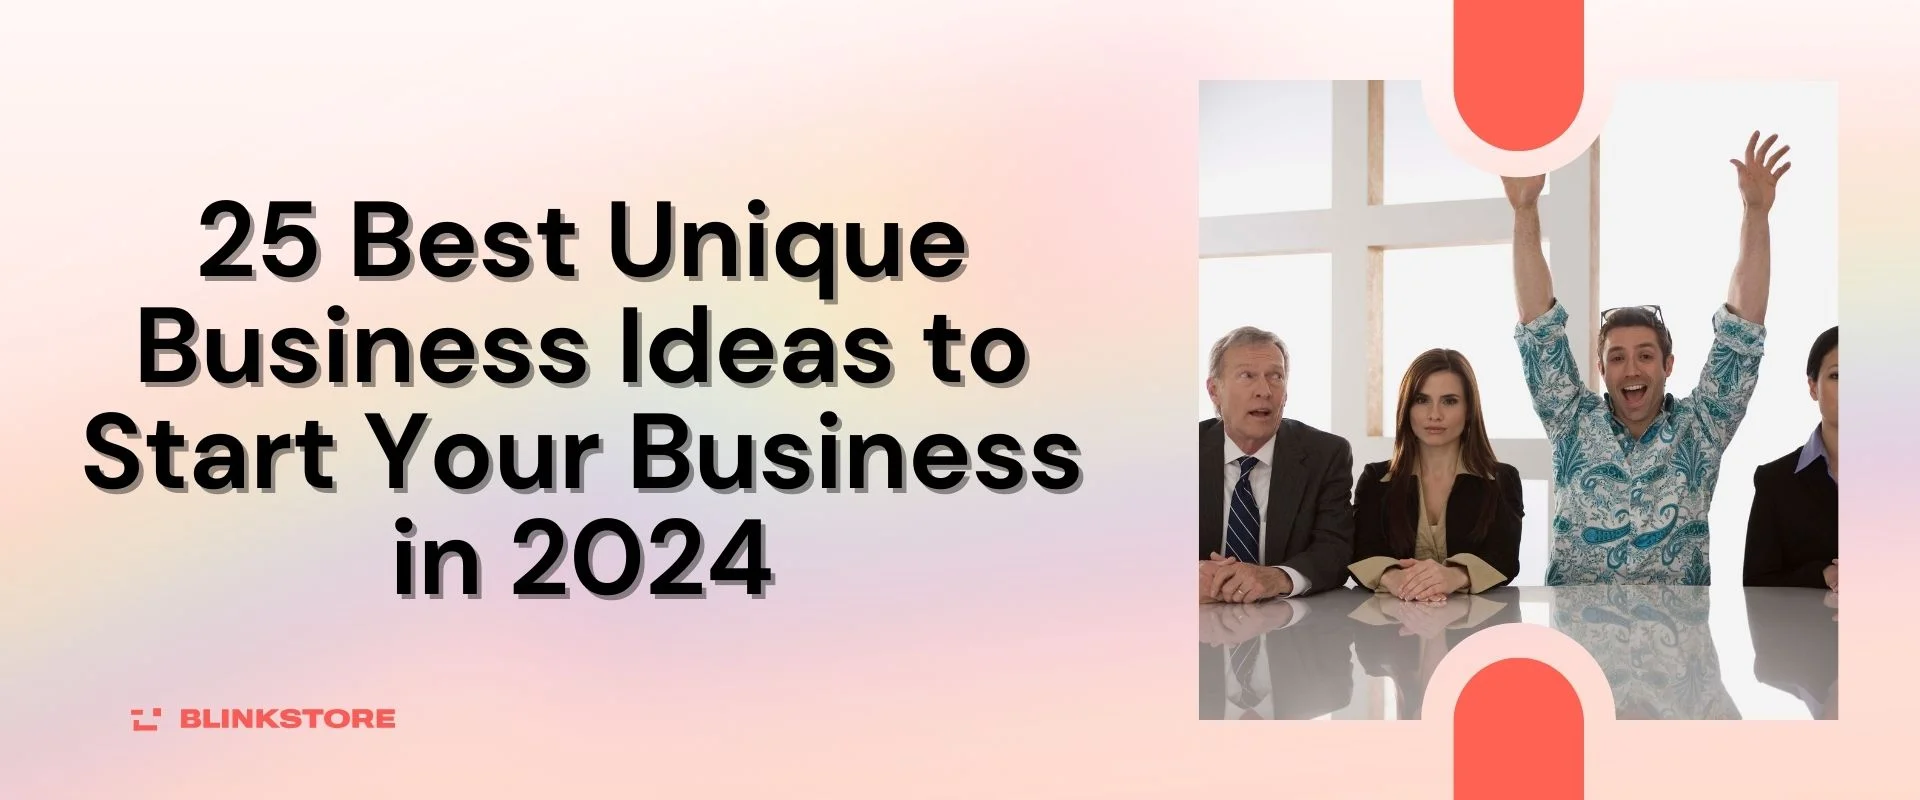 25 Best Unique Business Ideas to Start Your Business in 2024